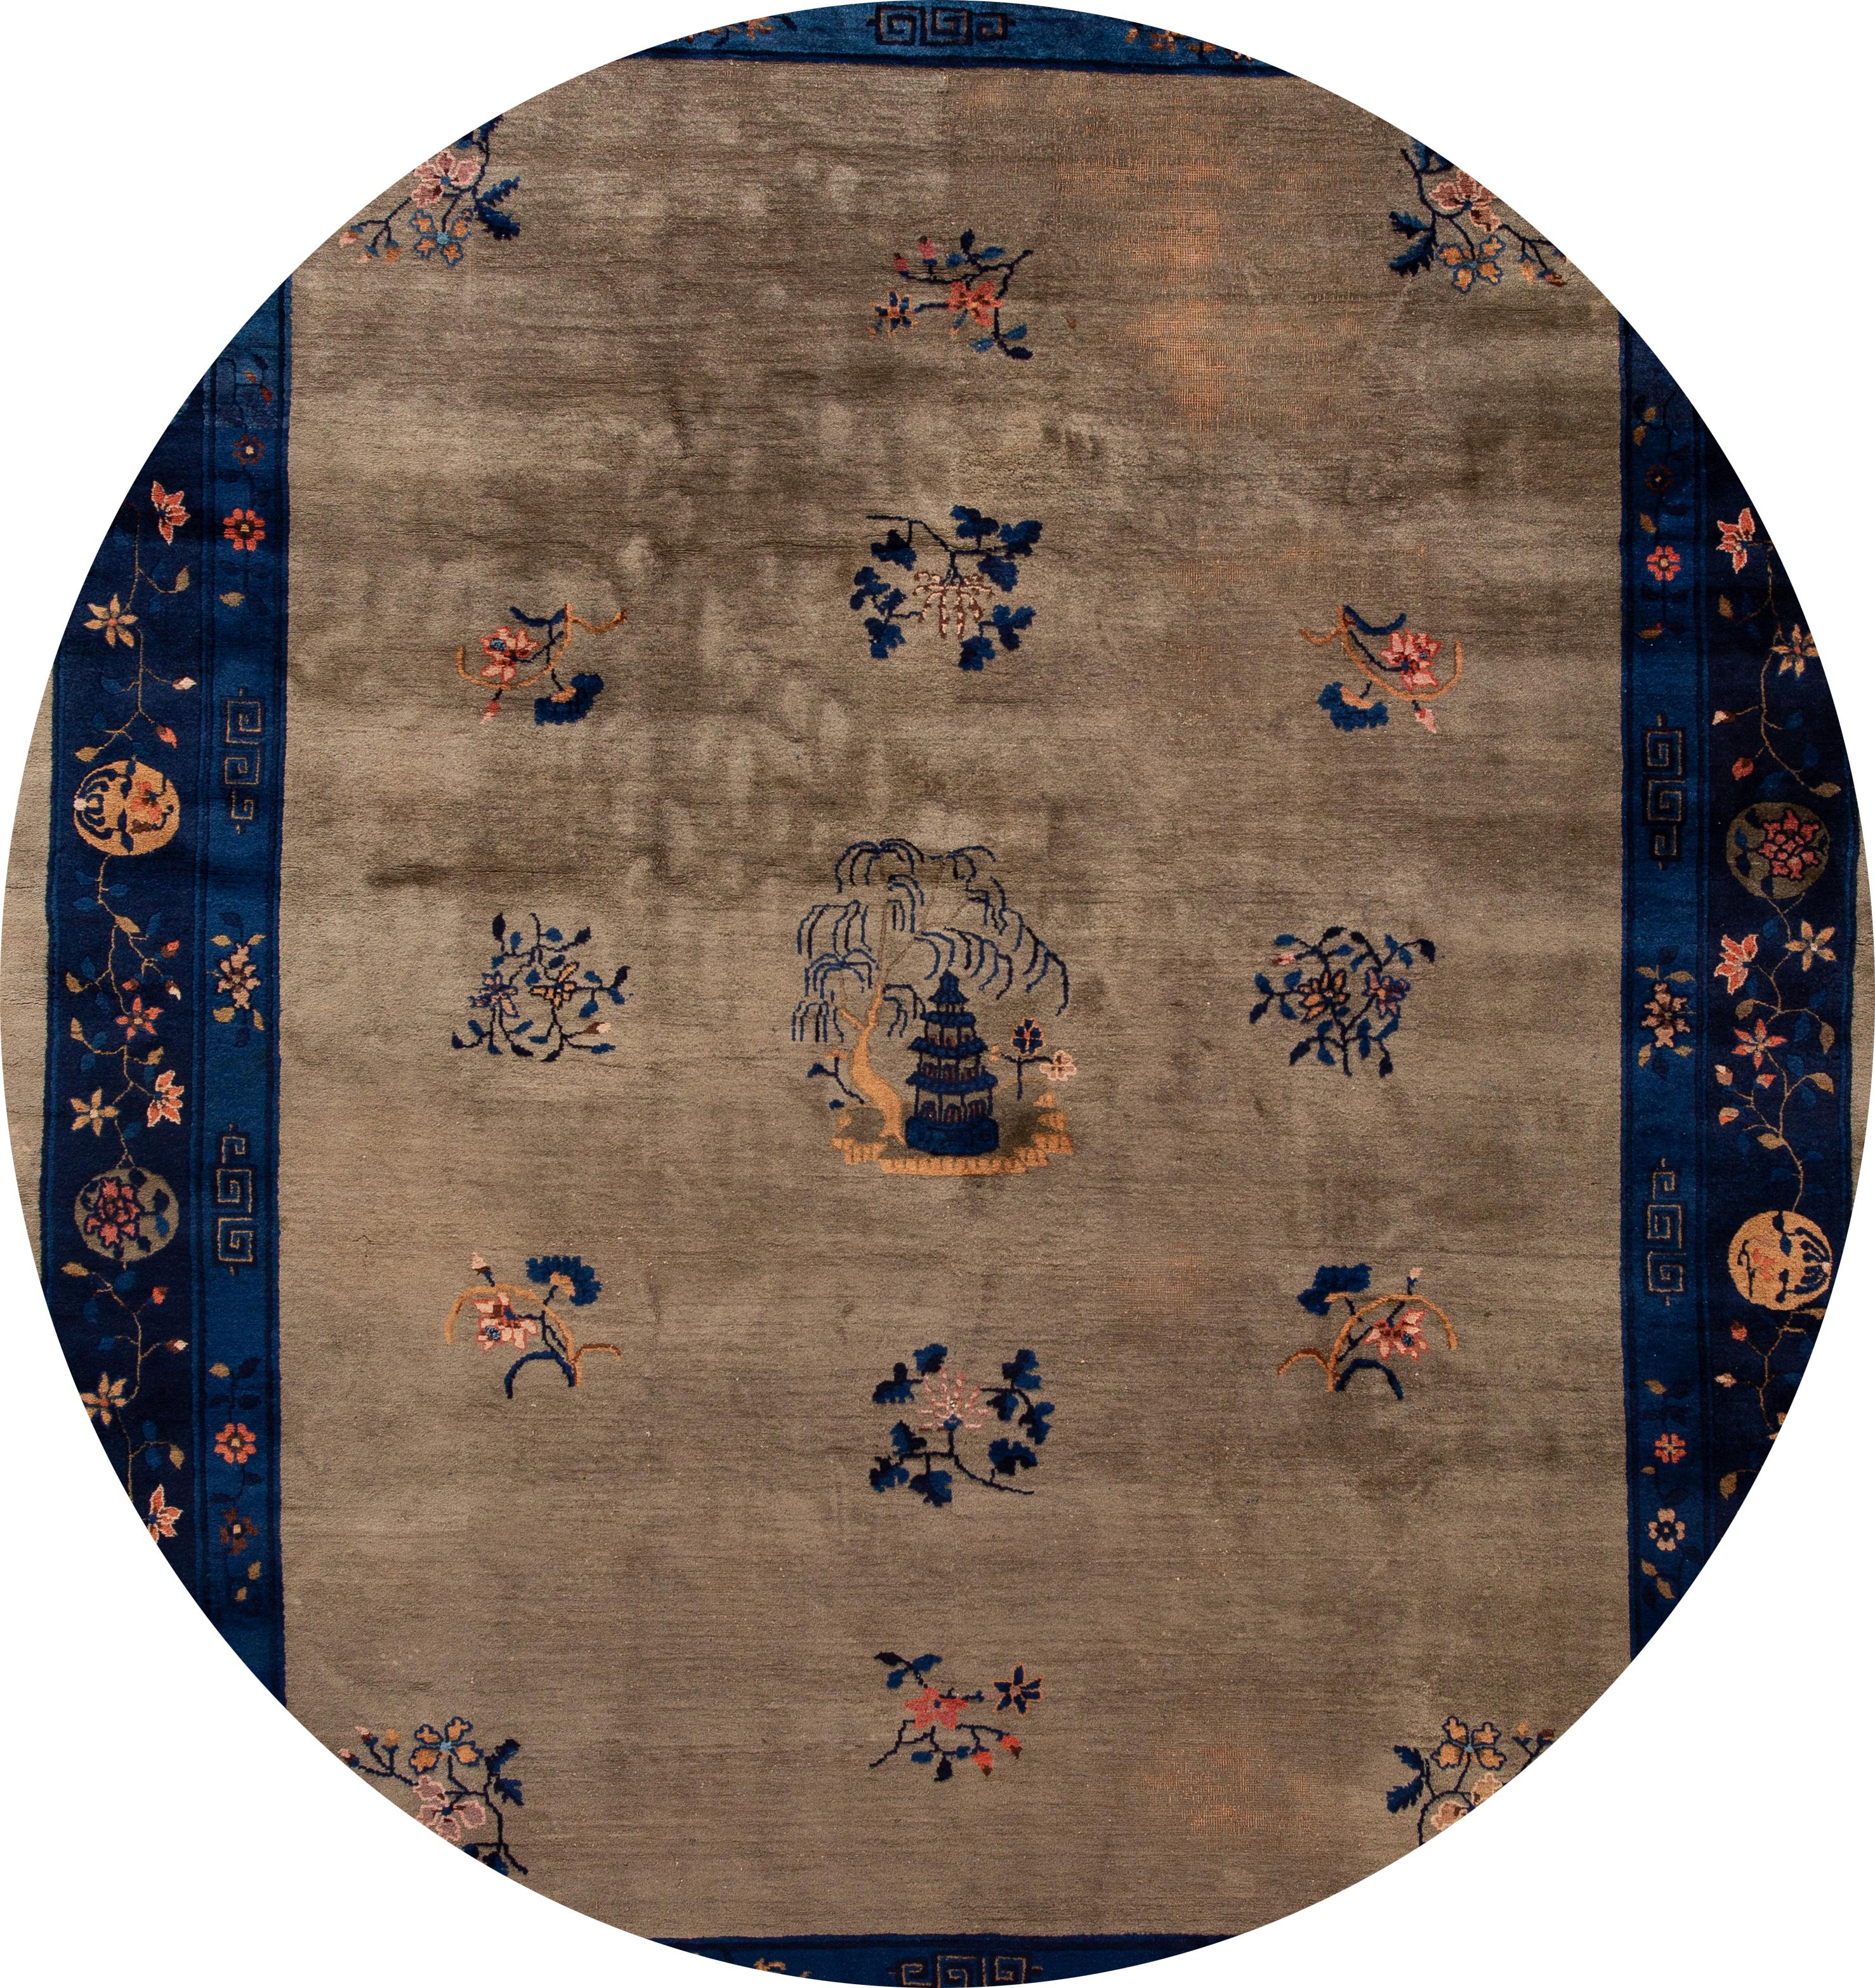 Beautiful antique Chinese Art Deco rug, hand-knotted wool with a tan field, navy-blue frame in a subtle all-over Classic Chinese floral design.
This rug measures: 9'1